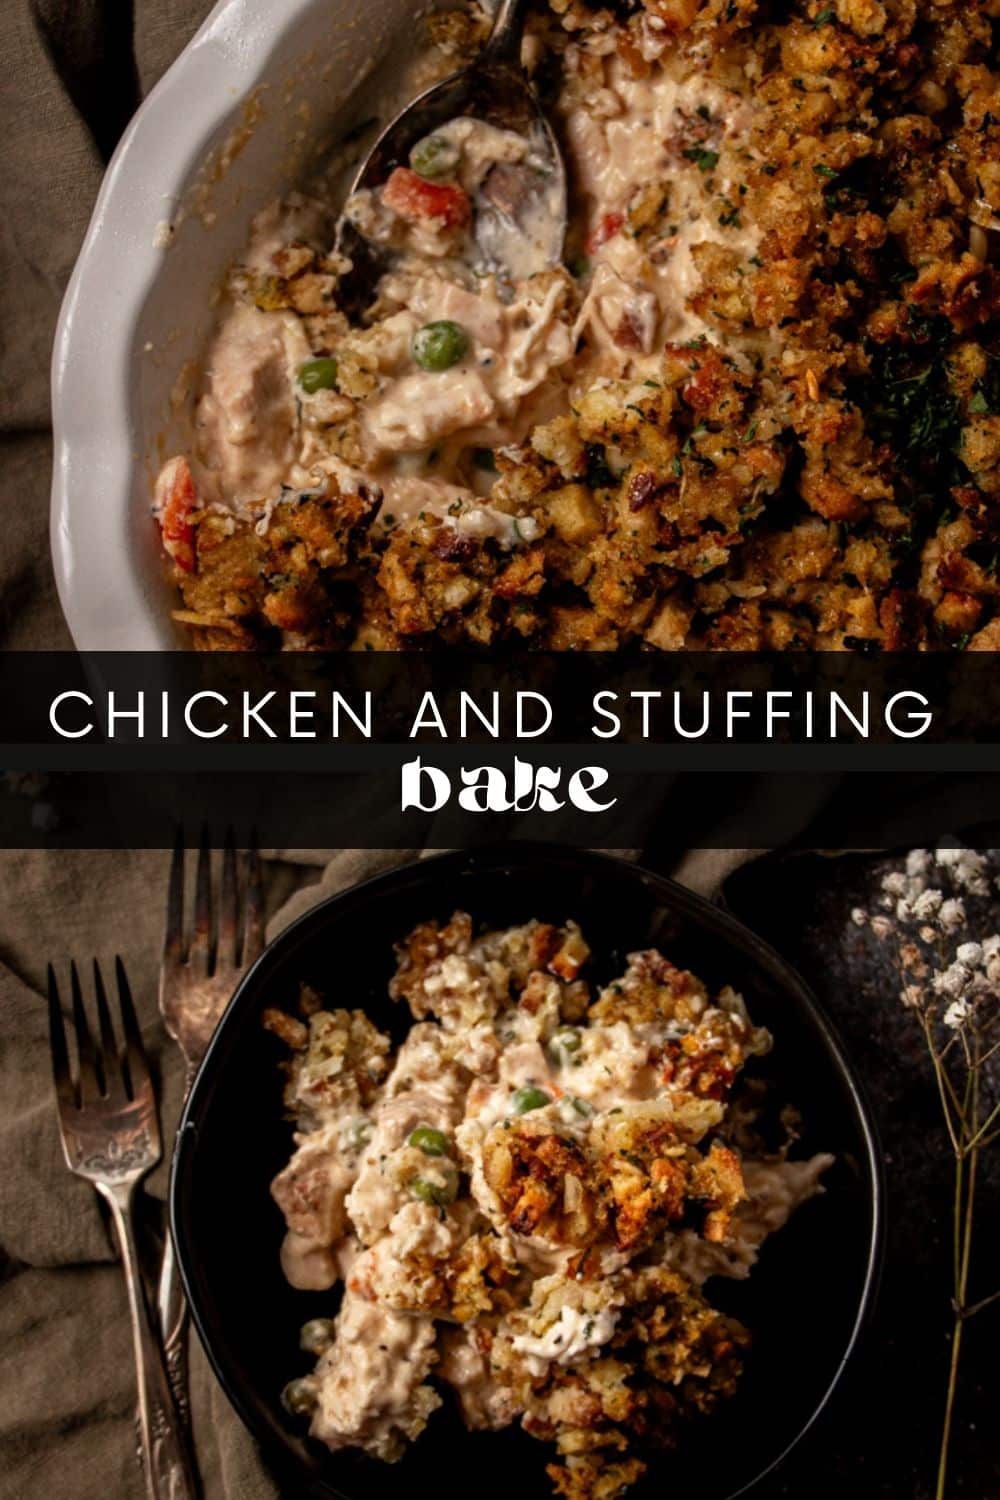 This one-pan chicken and stuffing bake is the perfect way to use up leftover rotisserie chicken! It's quick (thanks to boxed stuffing mix), easy, and uses pantry staples to reduce prep time. It's a family favorite that'll have everyone asking for seconds!